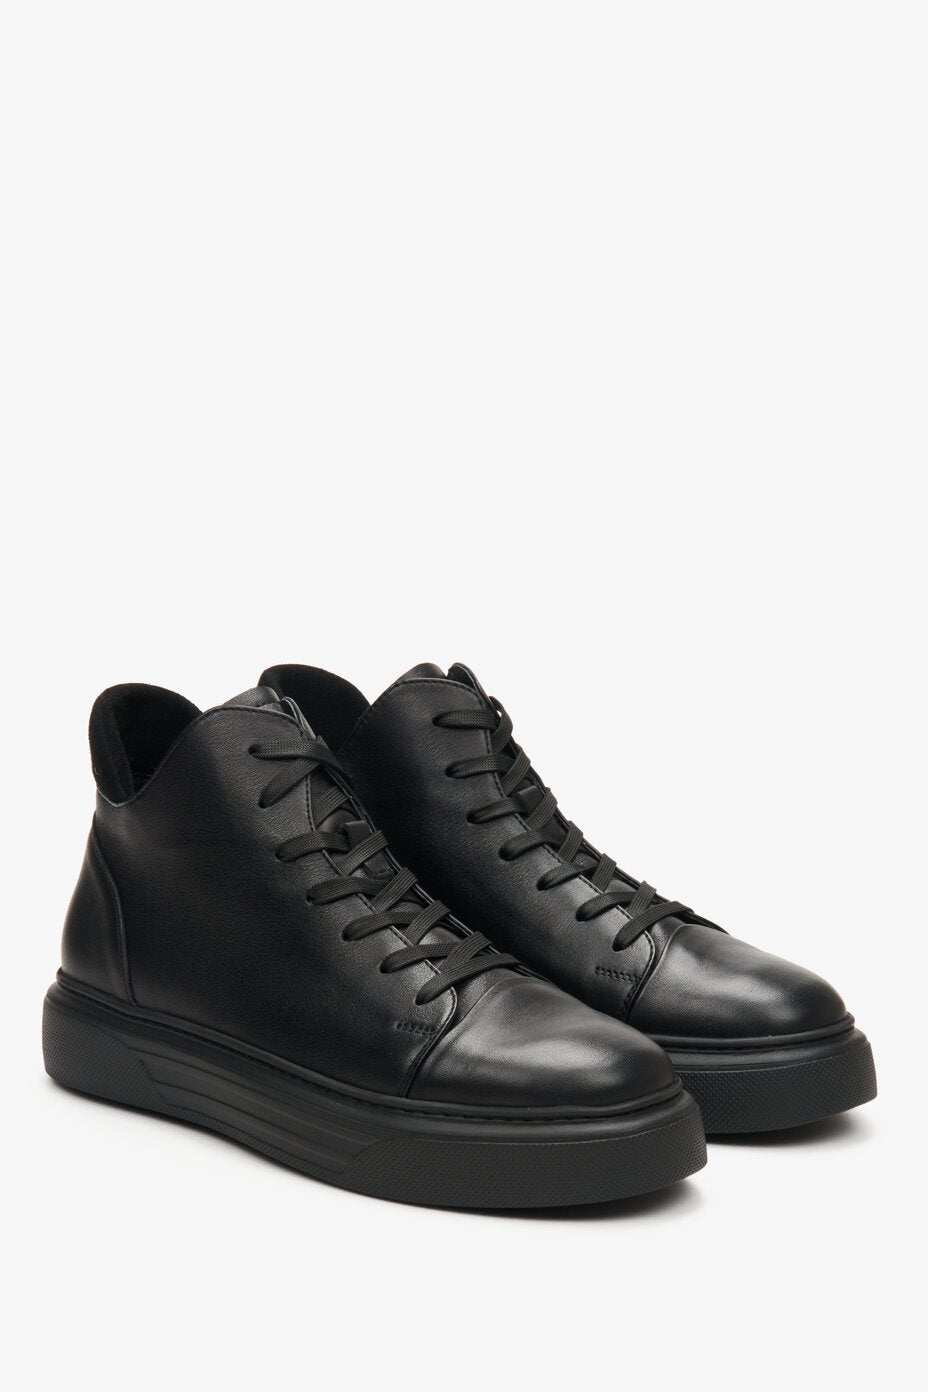 High men's winter boots with laces in black by Estro.